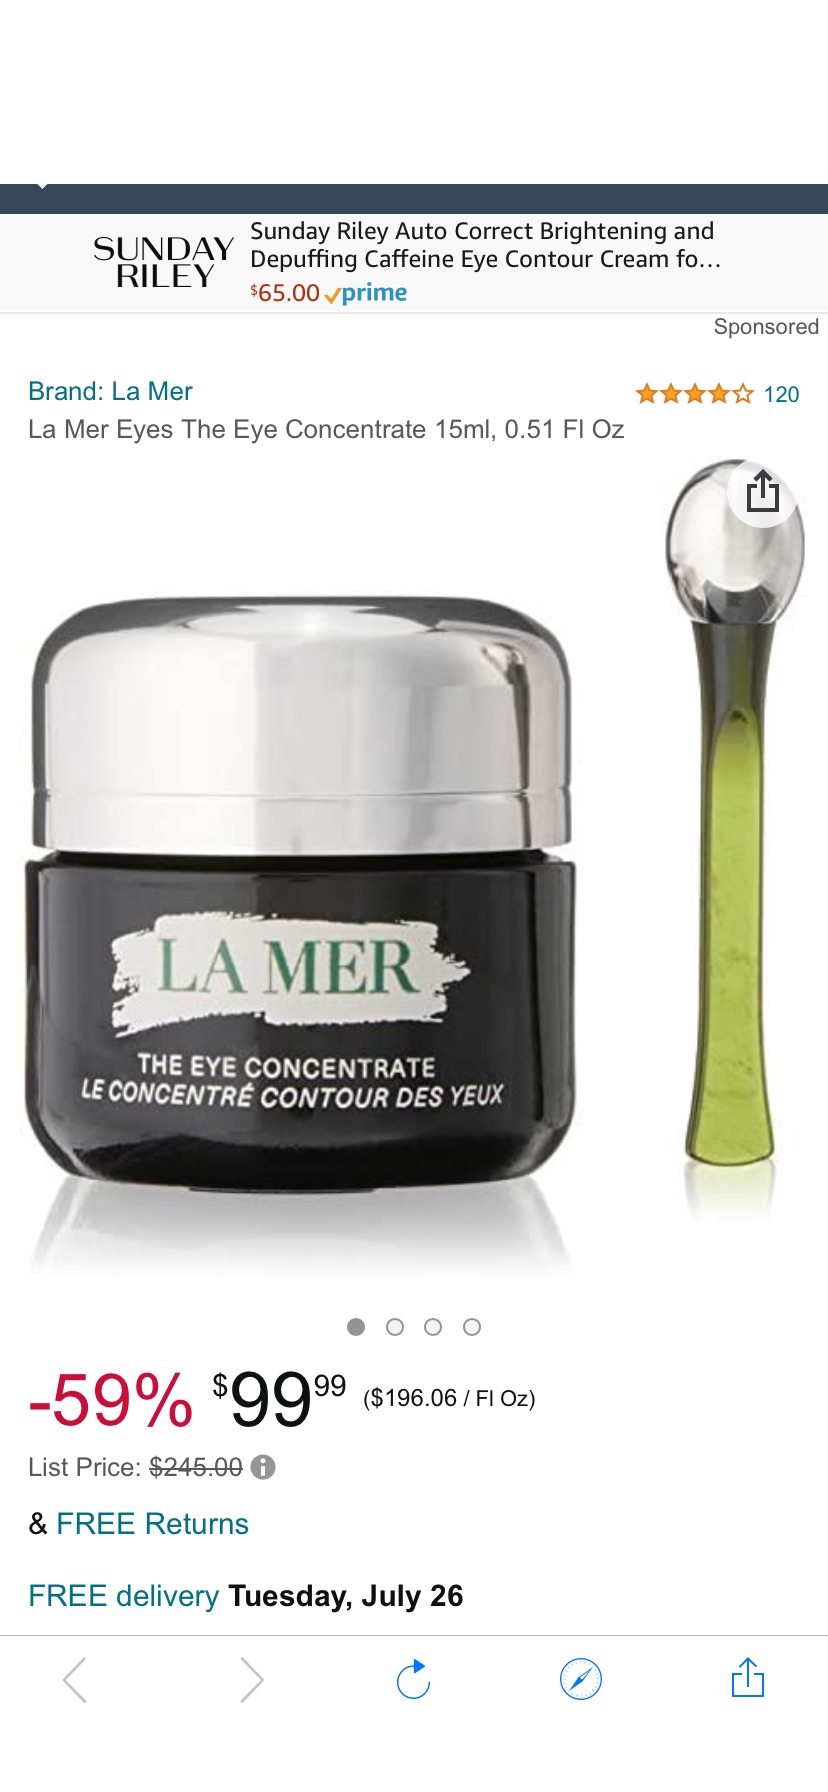 La Mer Eyes The Eye Concentrate 15ml